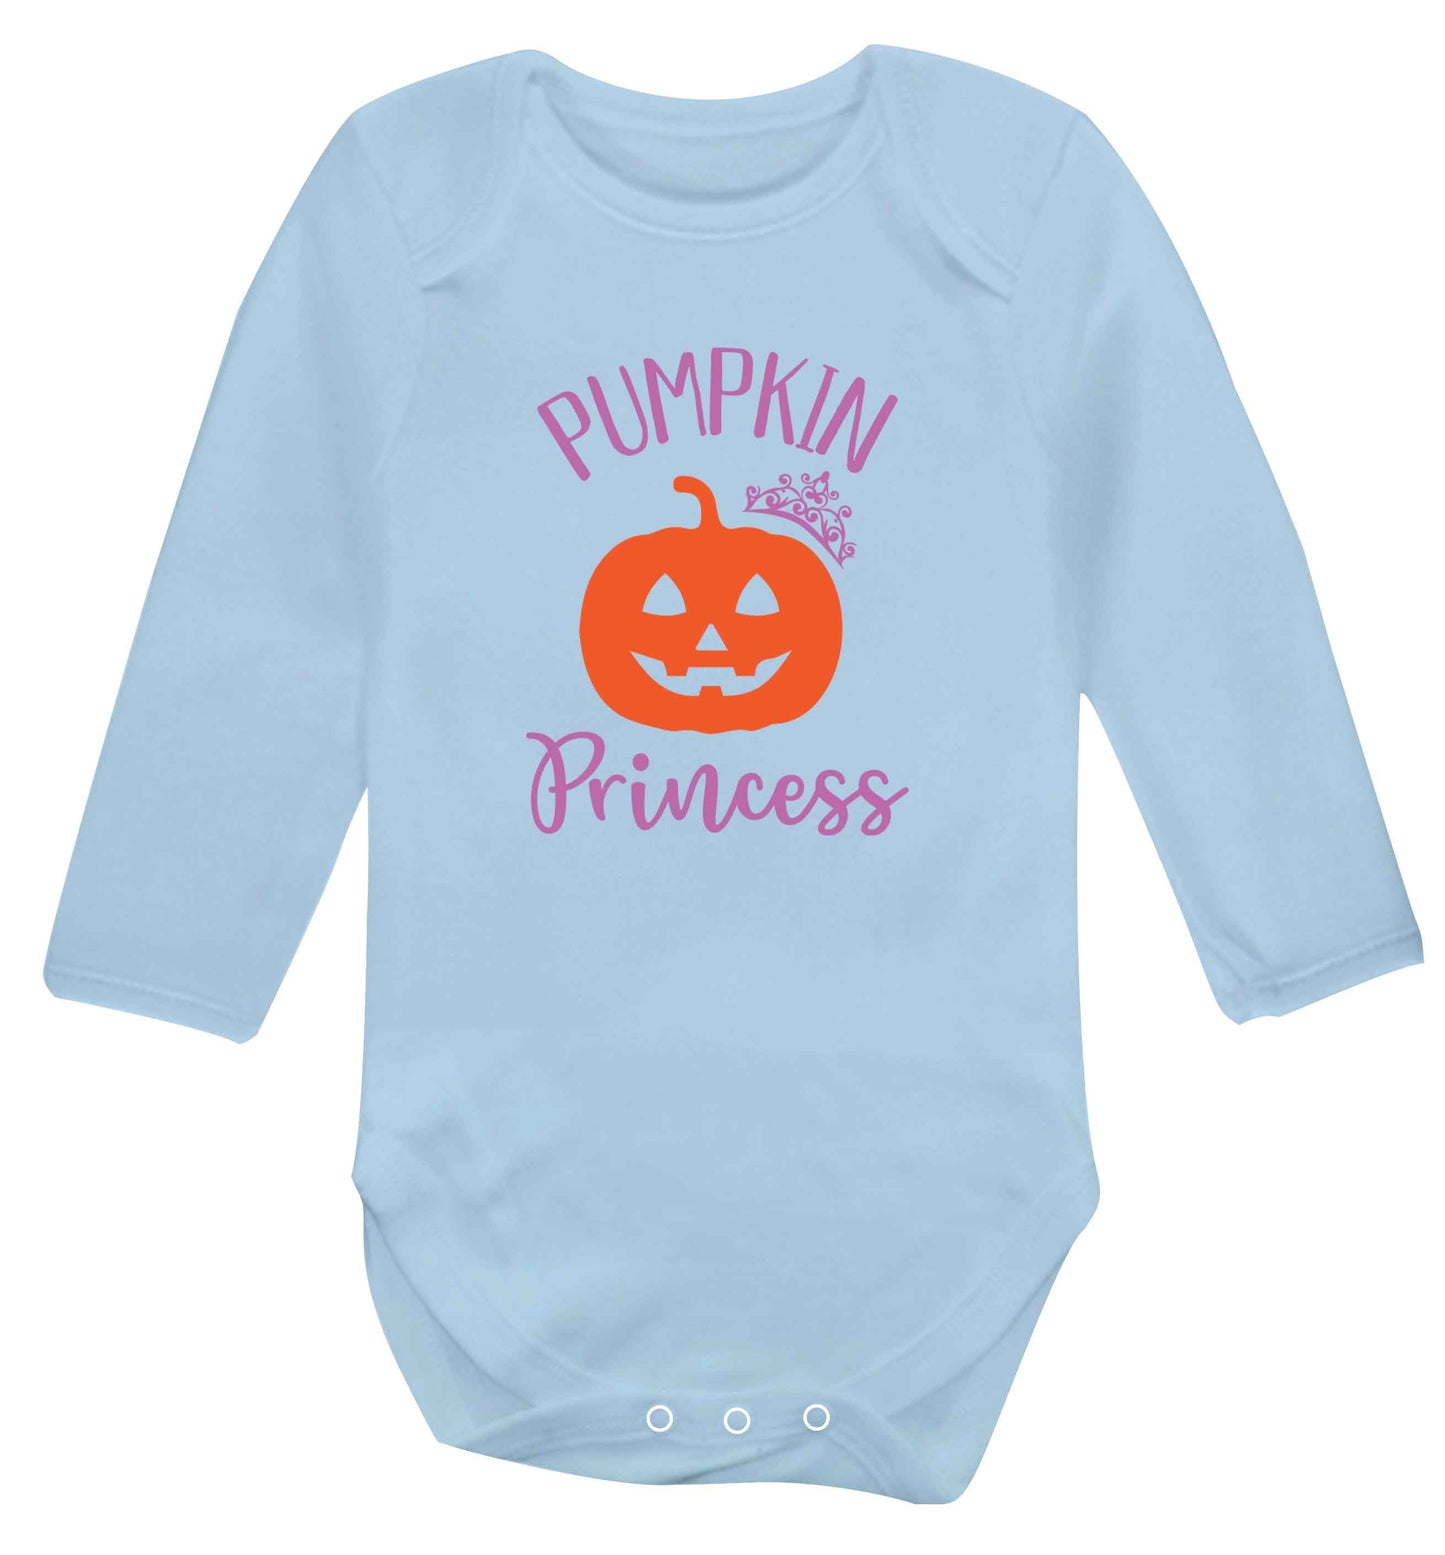 Happiness Pumpkin Spice baby vest long sleeved pale blue 6-12 months